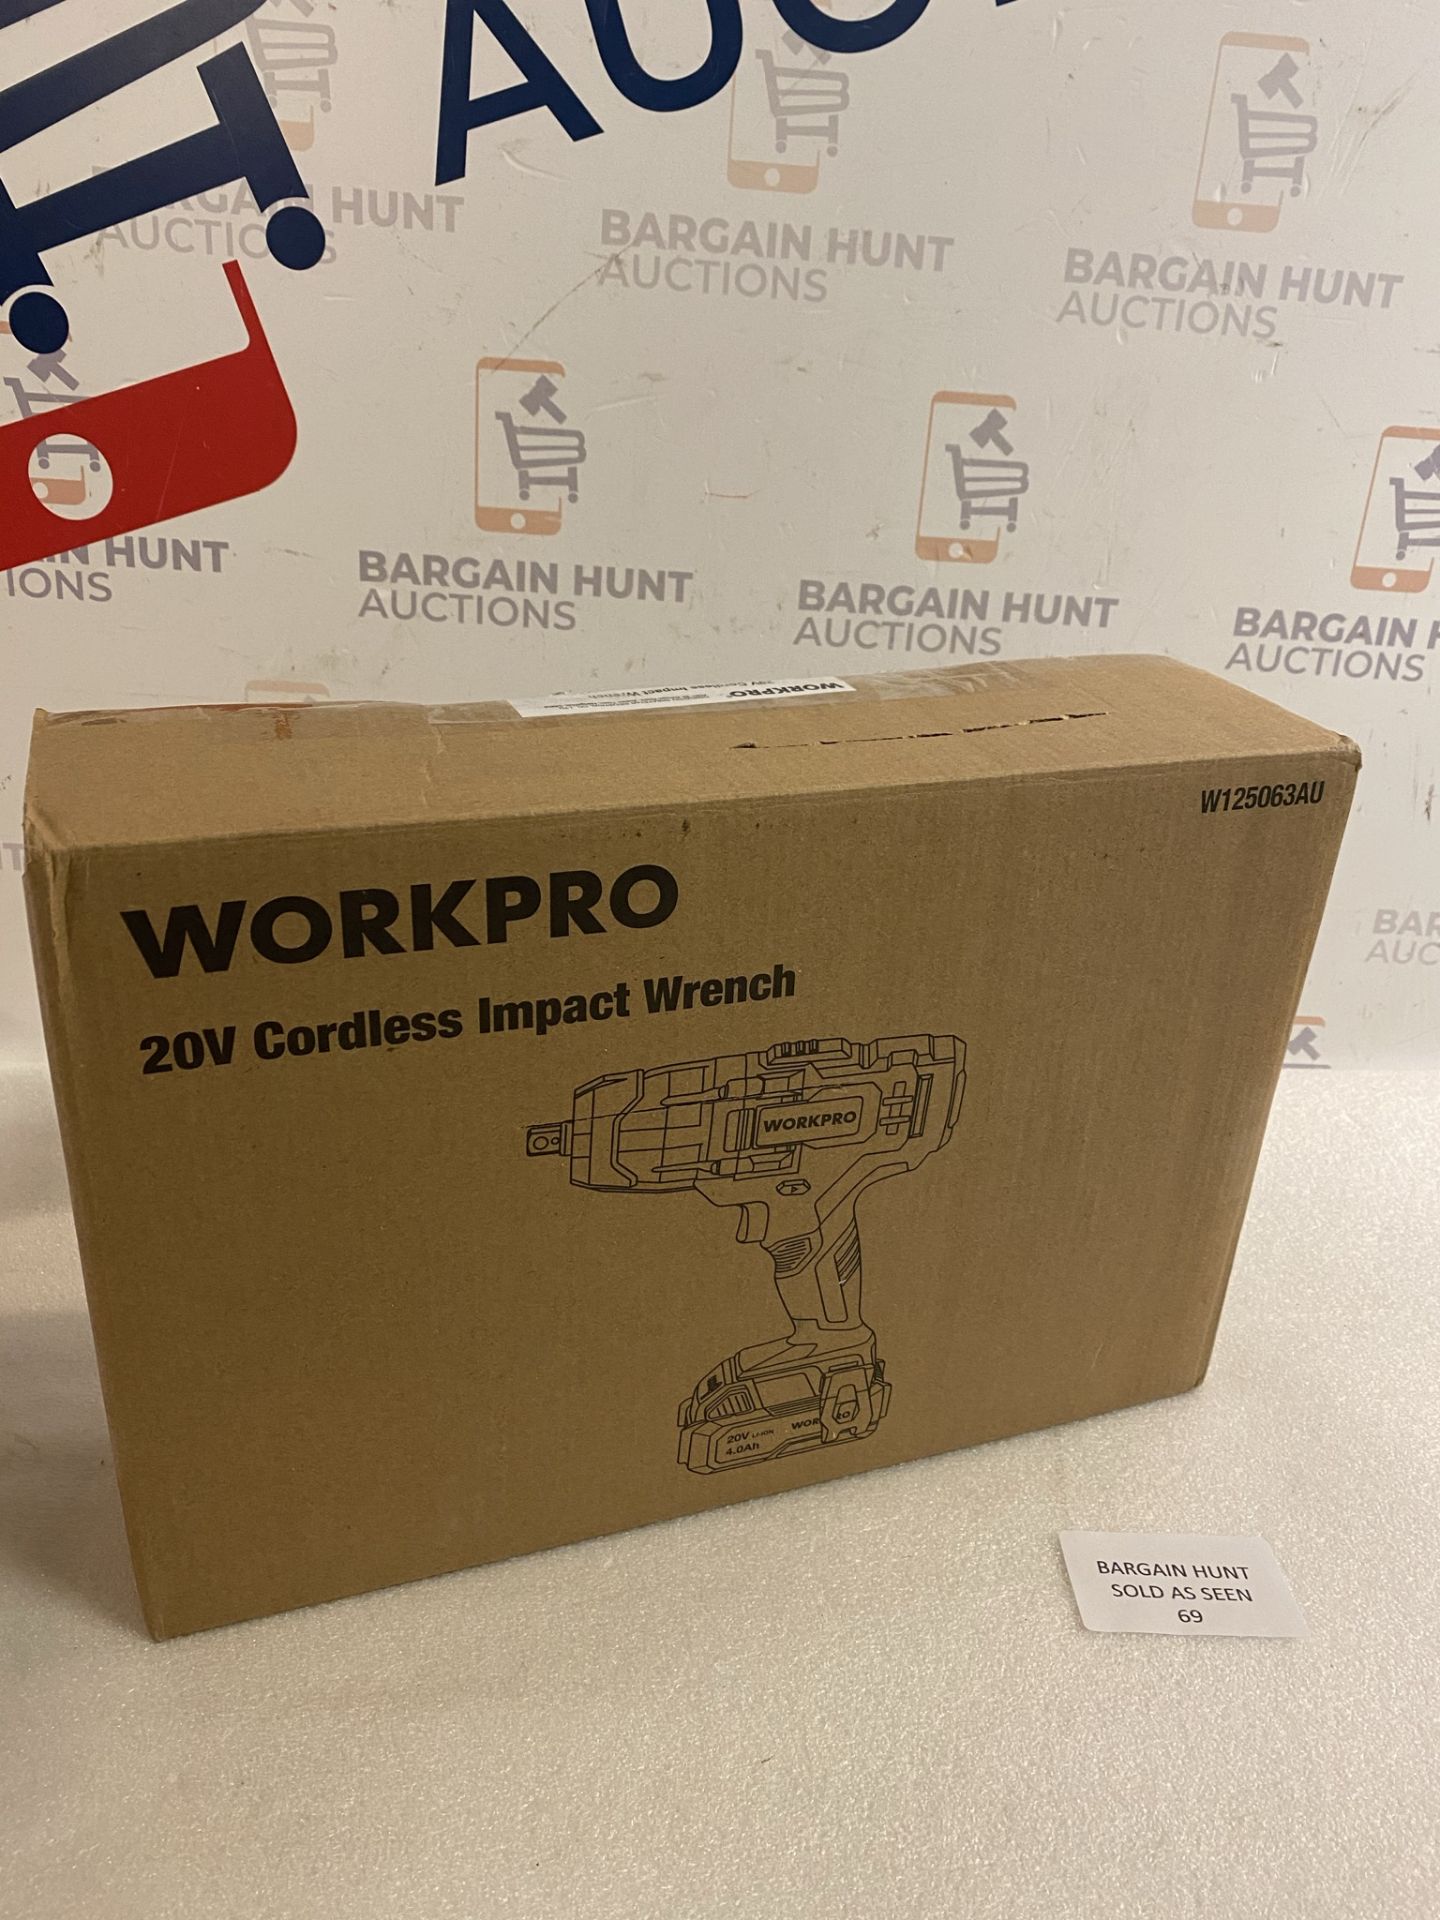 WORKPRO Cordless Impact Wrench Lightweight RRP £79.99 - Image 2 of 2